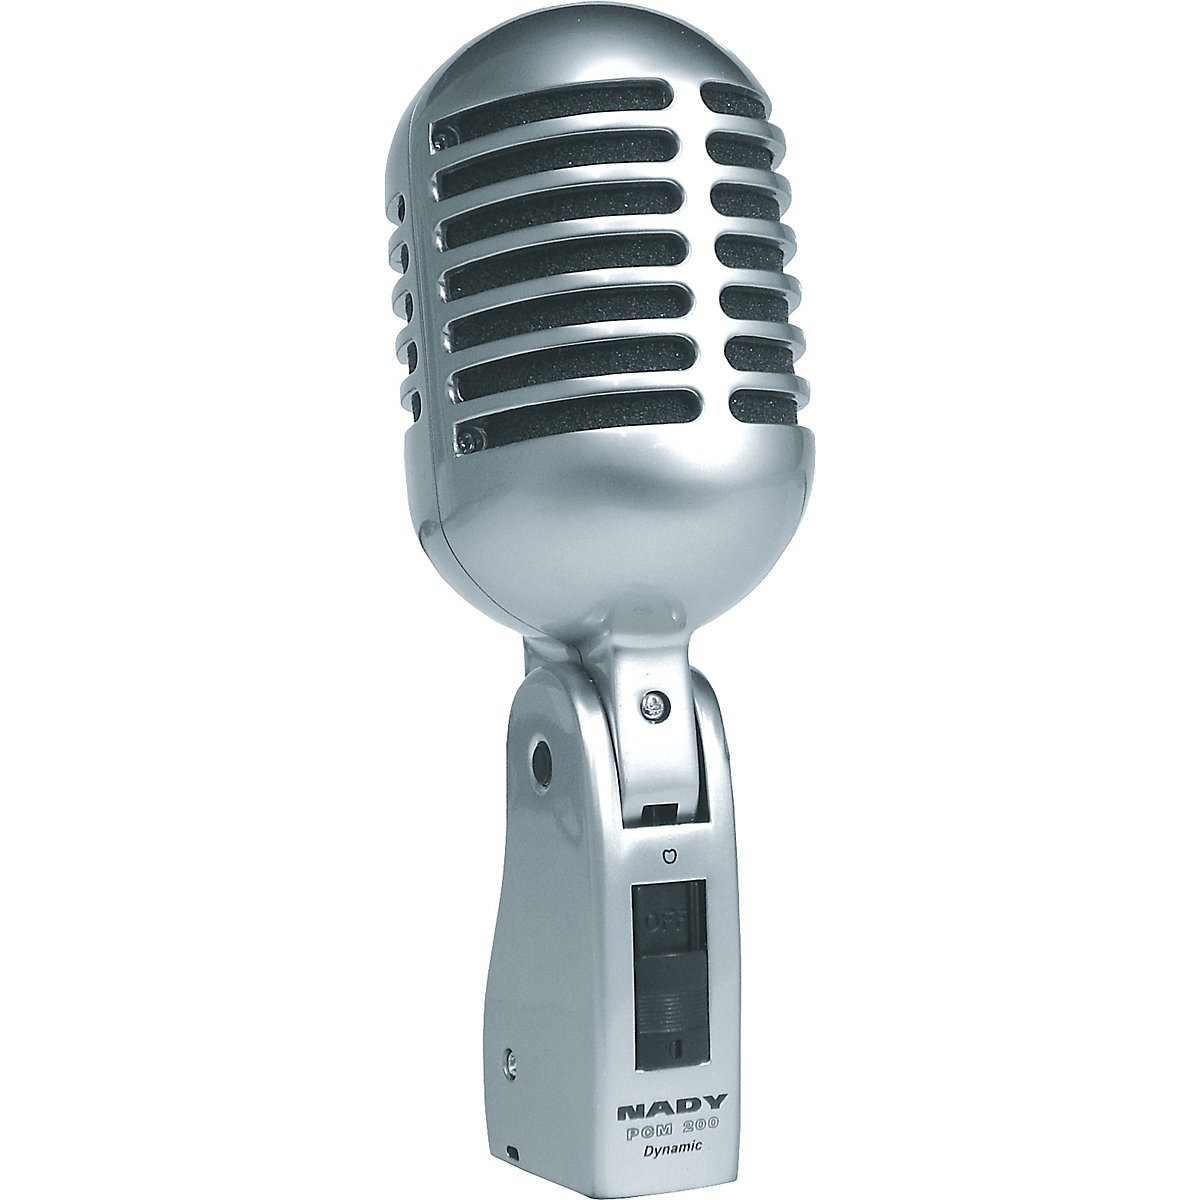 Nady Pcm-200 Professional Classic Dynamic Microphone, Cardioid